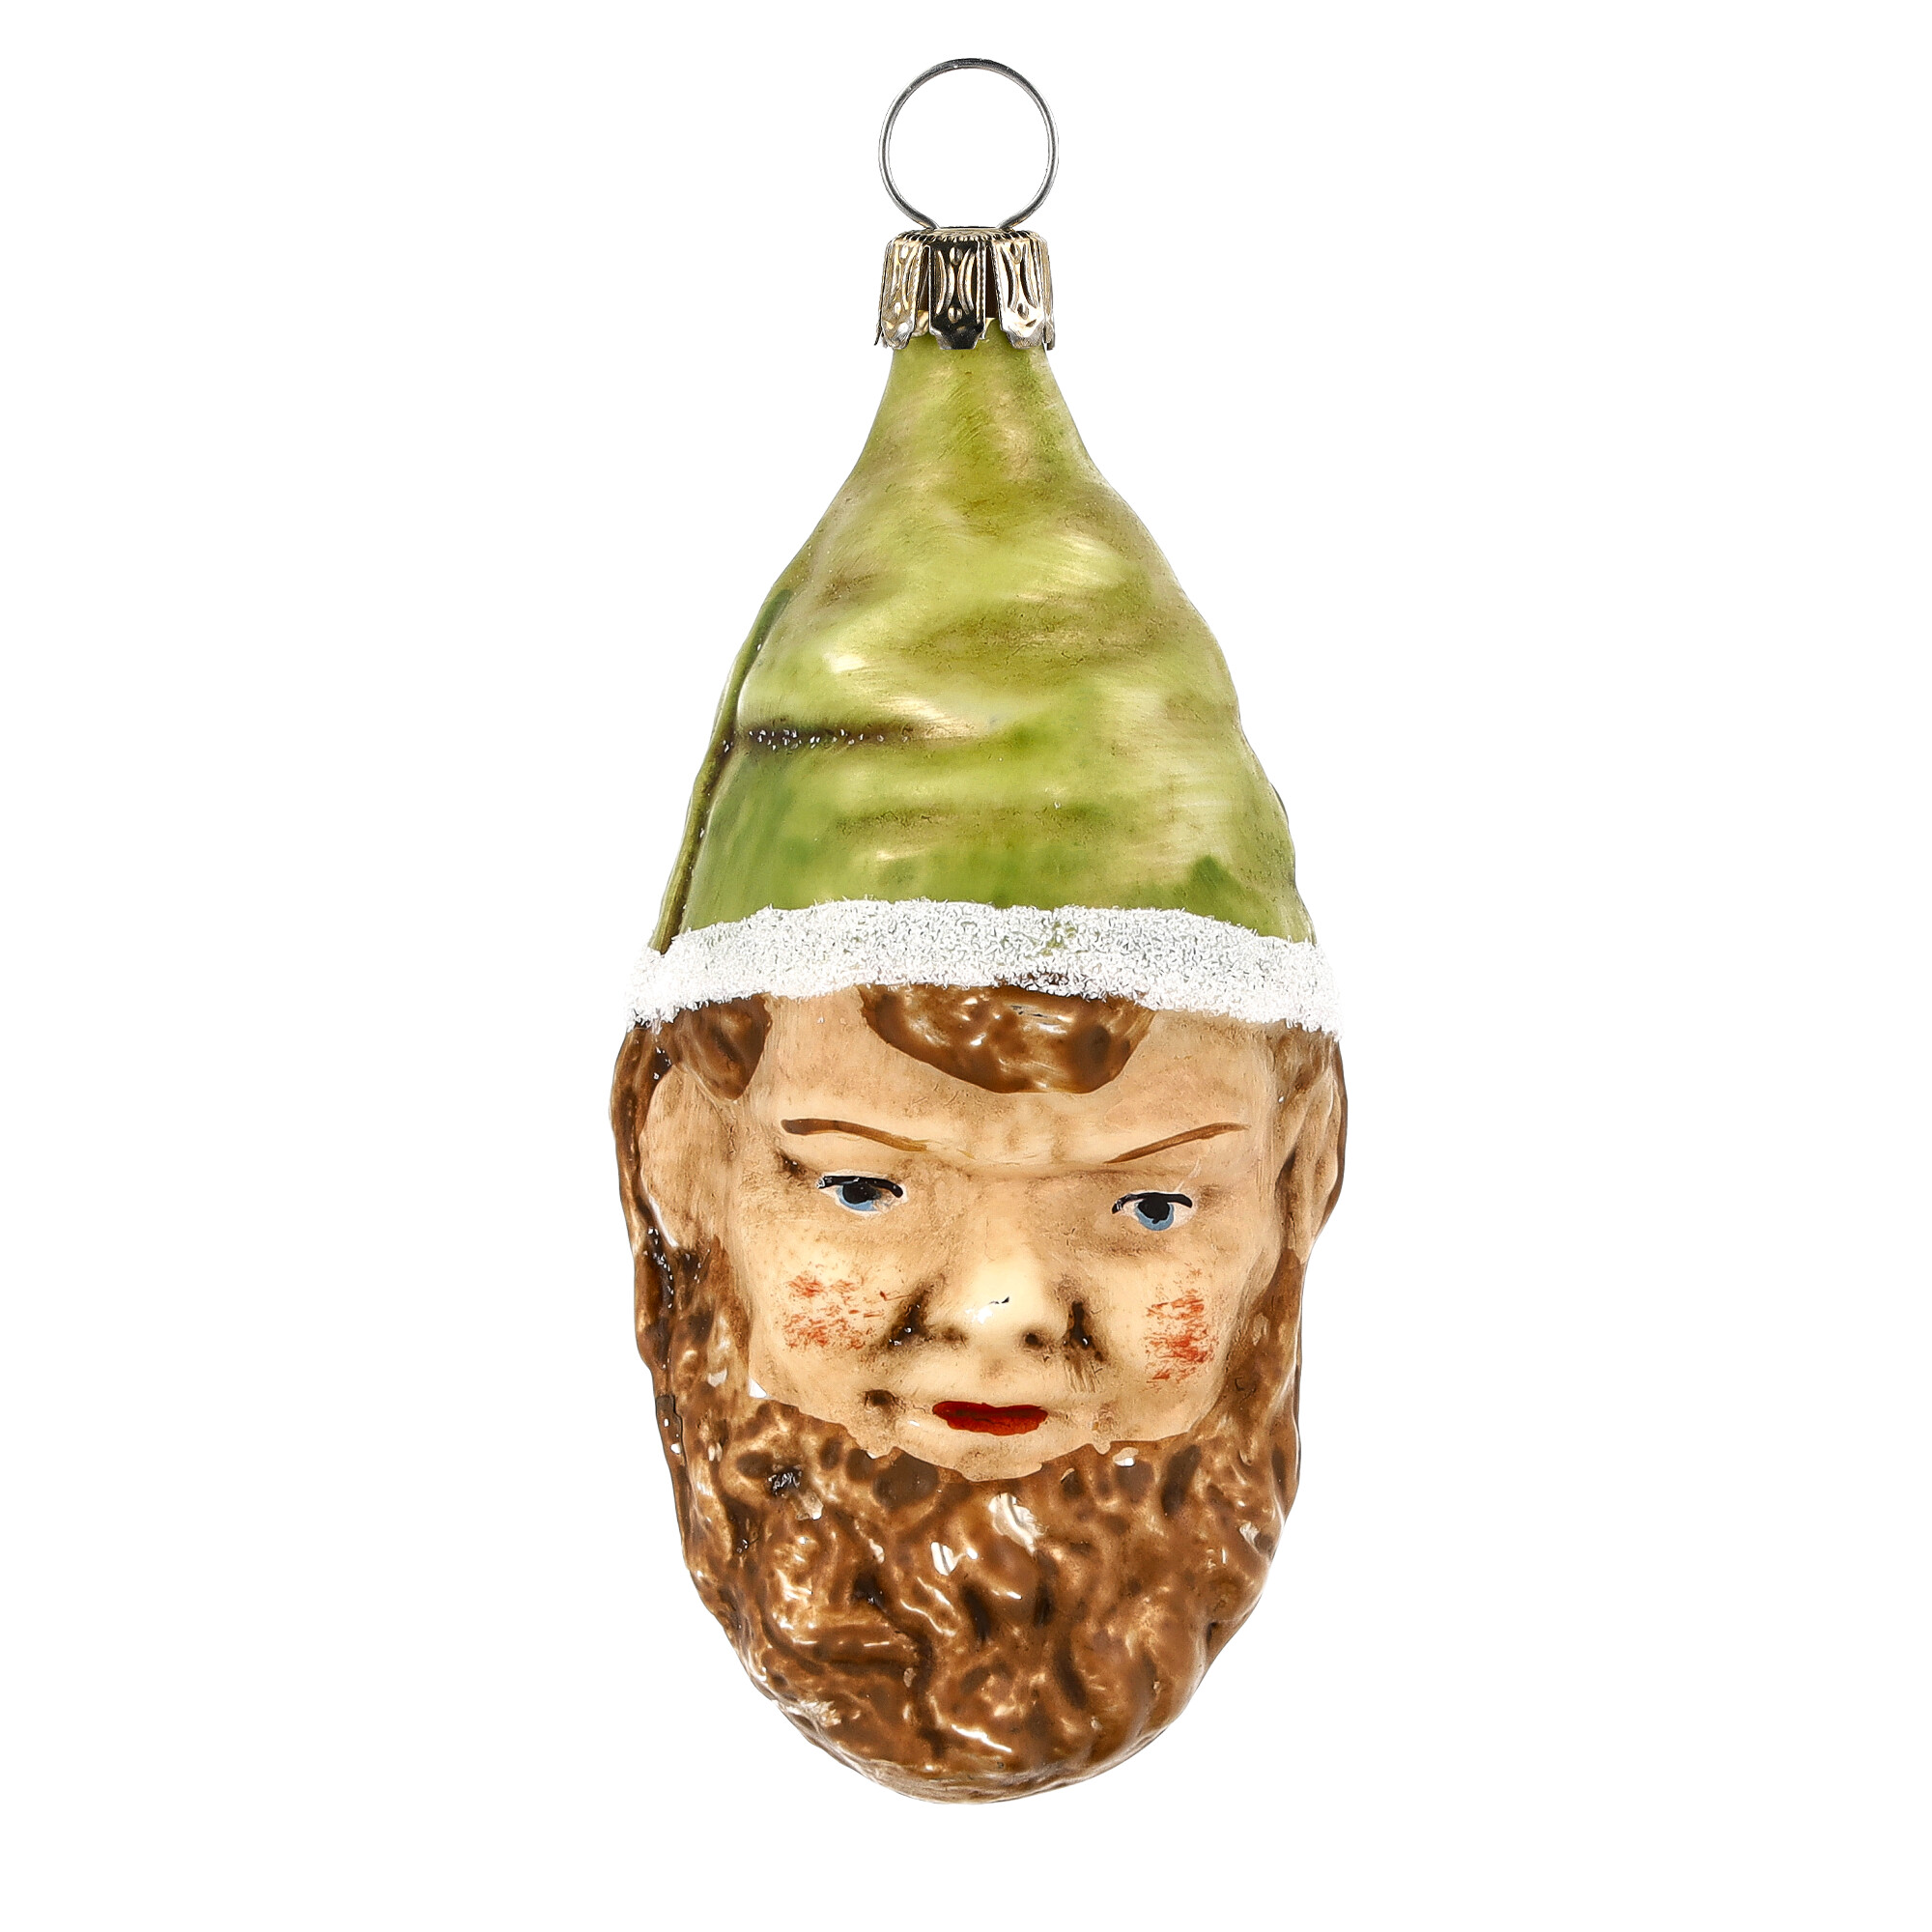 Retro Vintage style Christmas Glass Ornament - Dwarf with green hat